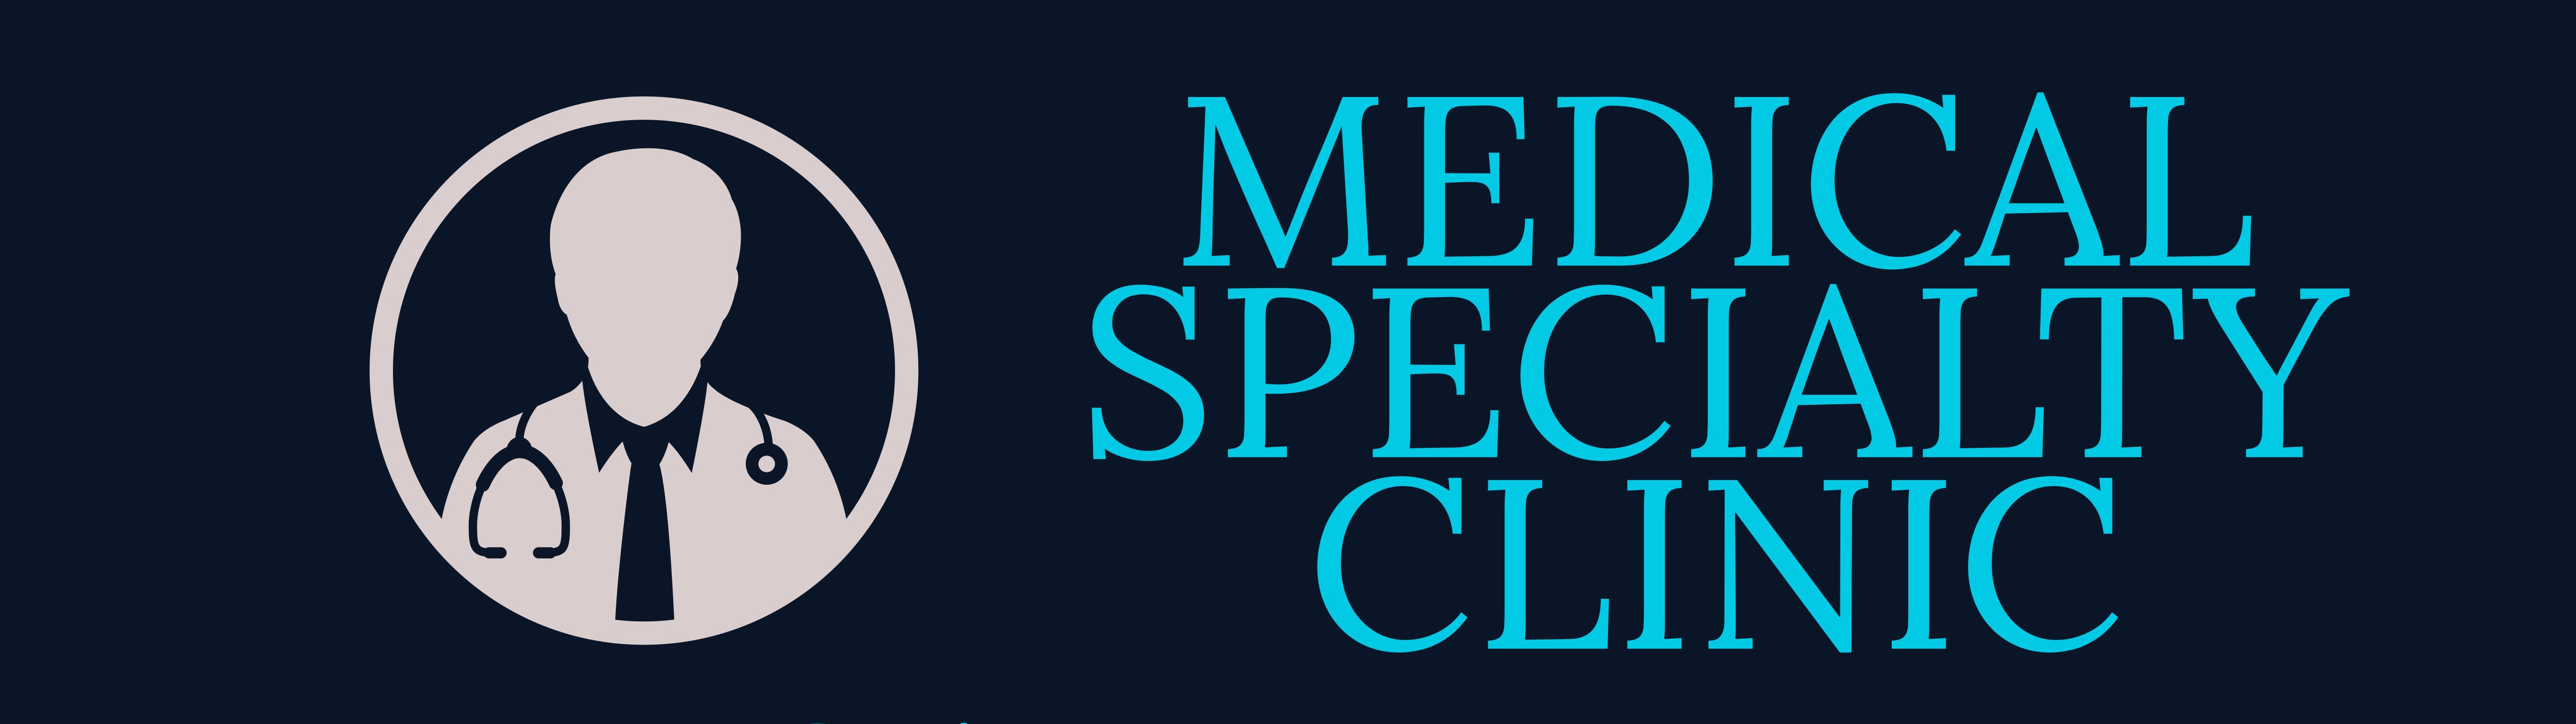 Medical Specialty Clinic